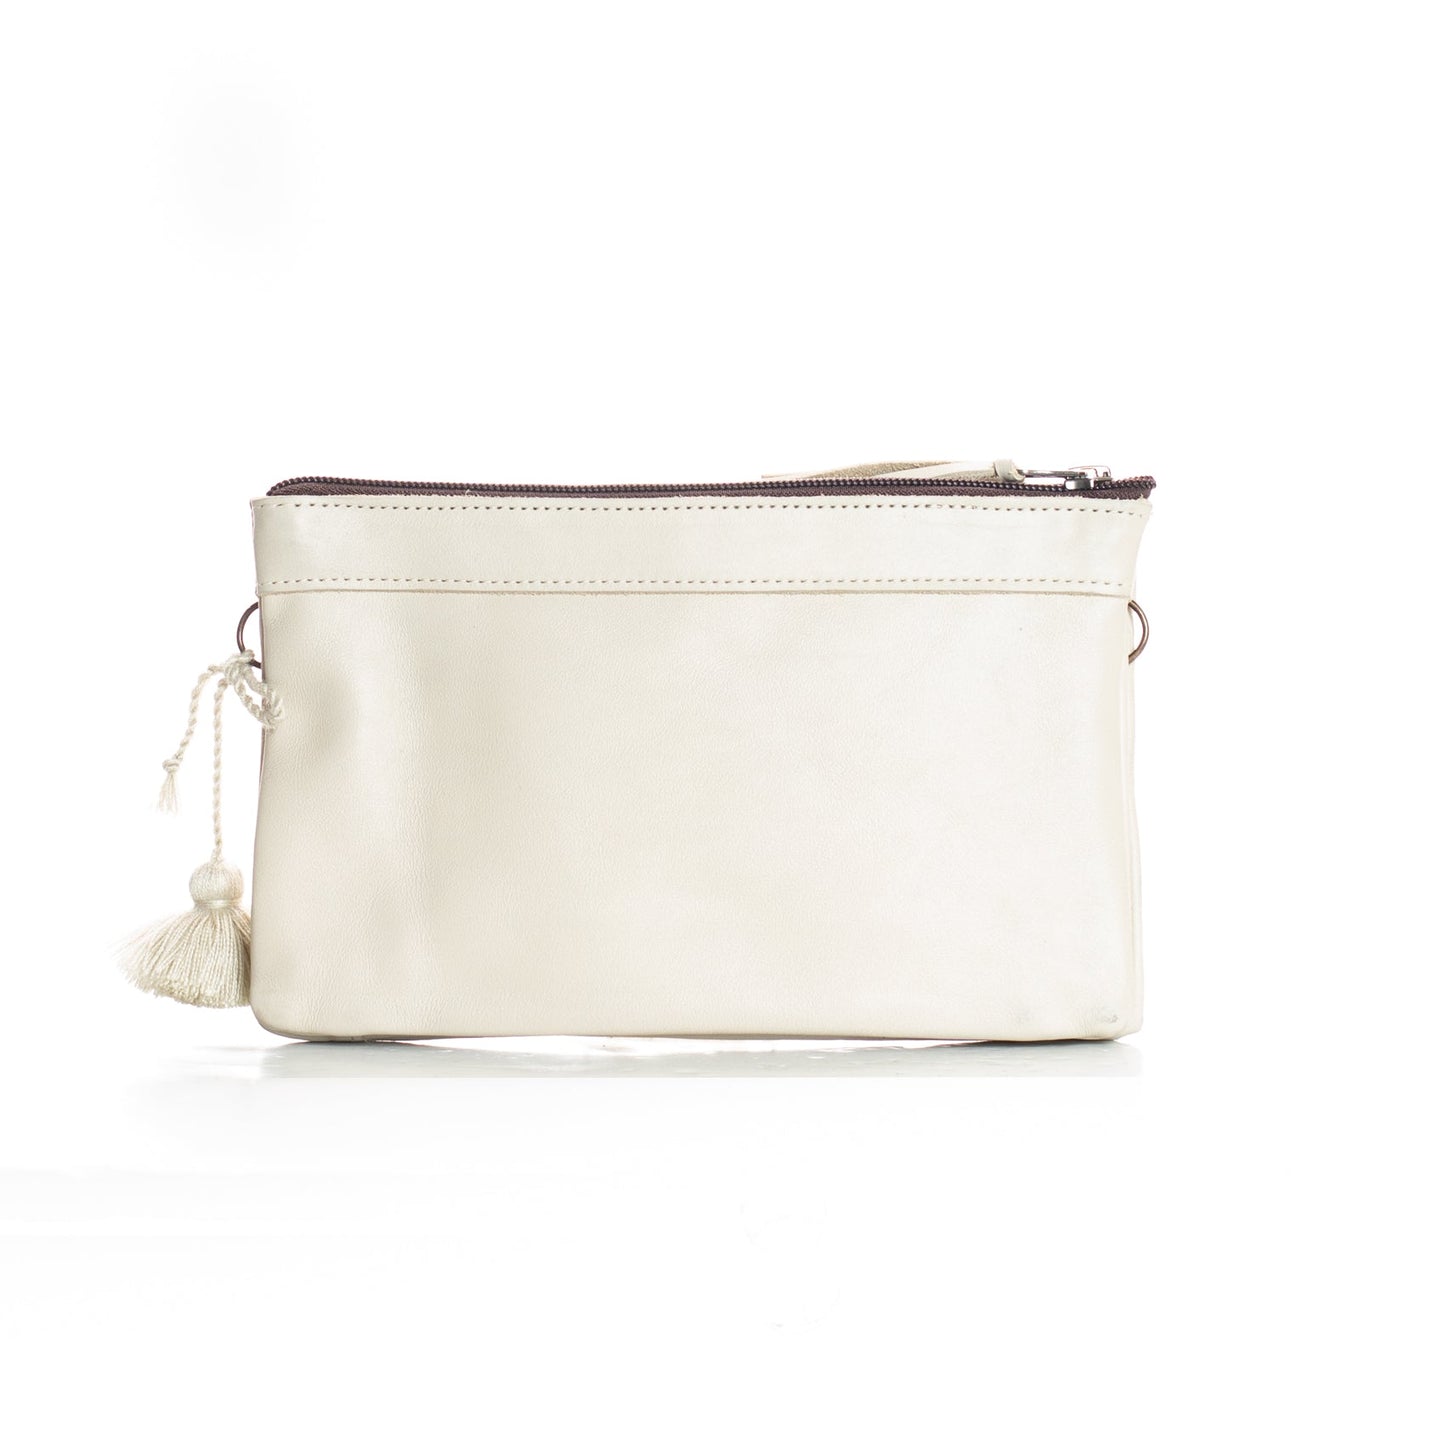 DOUBLE  PERFECT CLUTCH - FULL LEATHER COLLECTION - BONE LEATHER